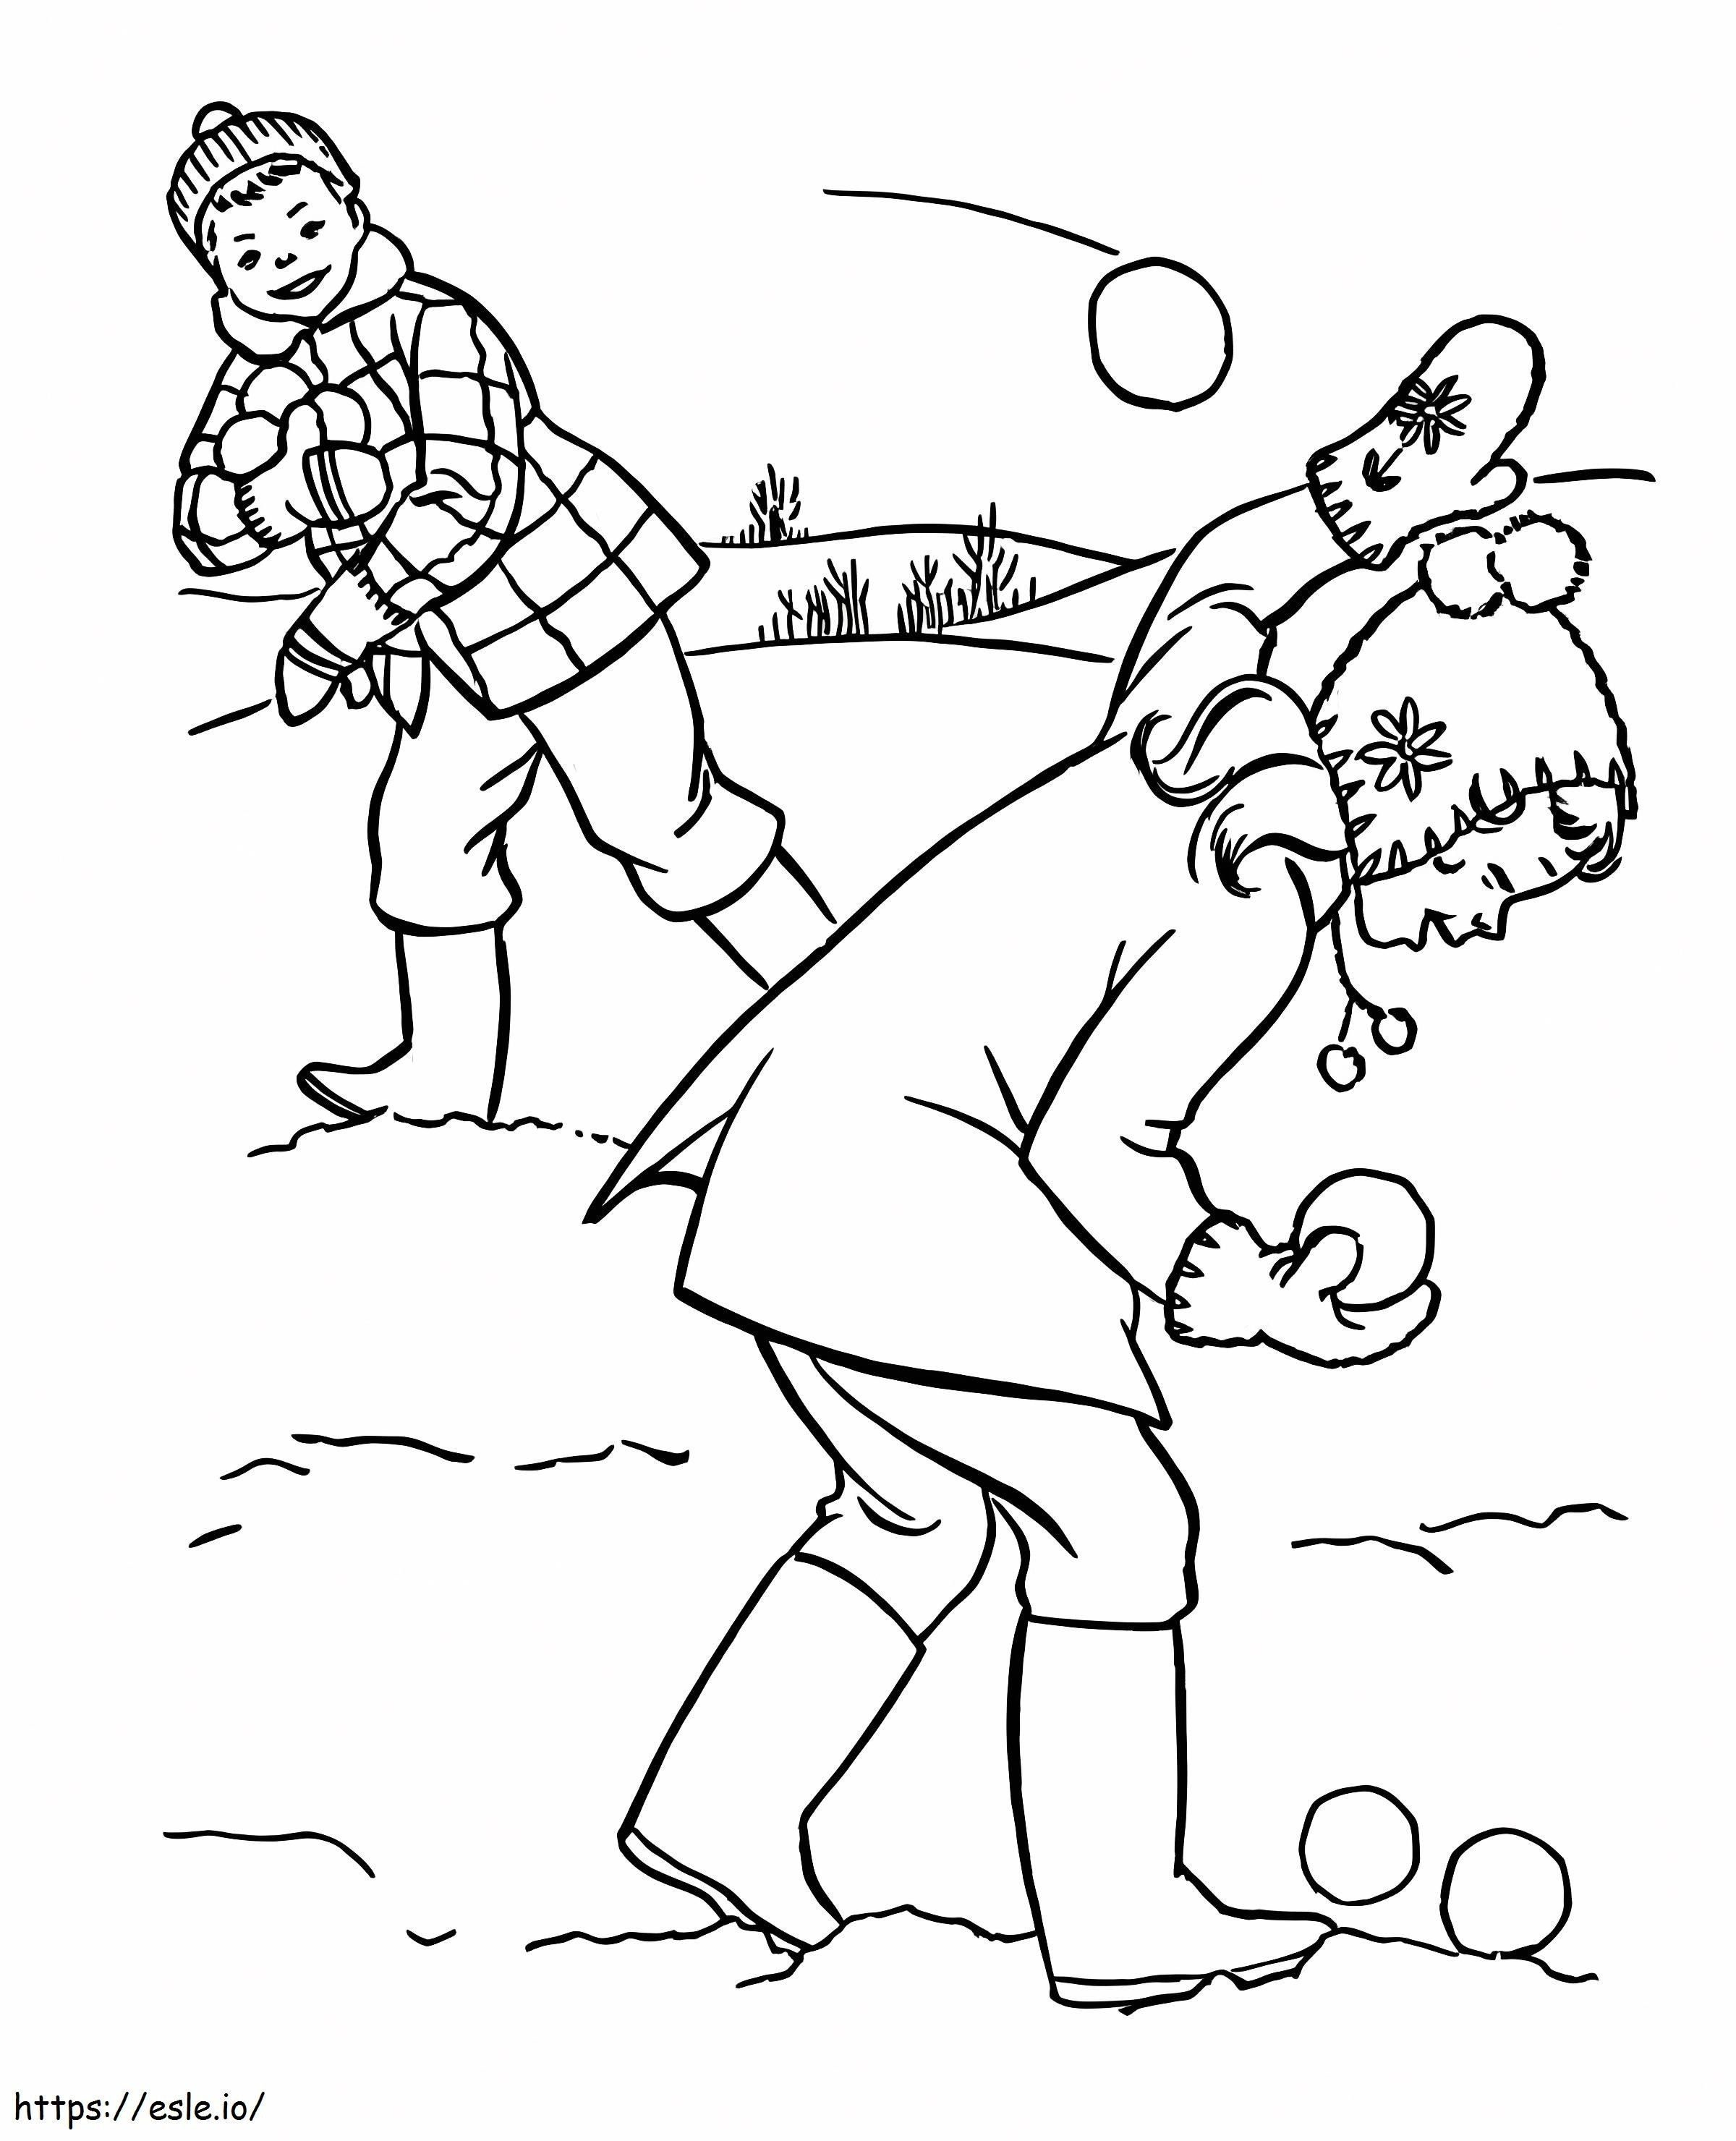 Snowball Fight With Friends coloring page